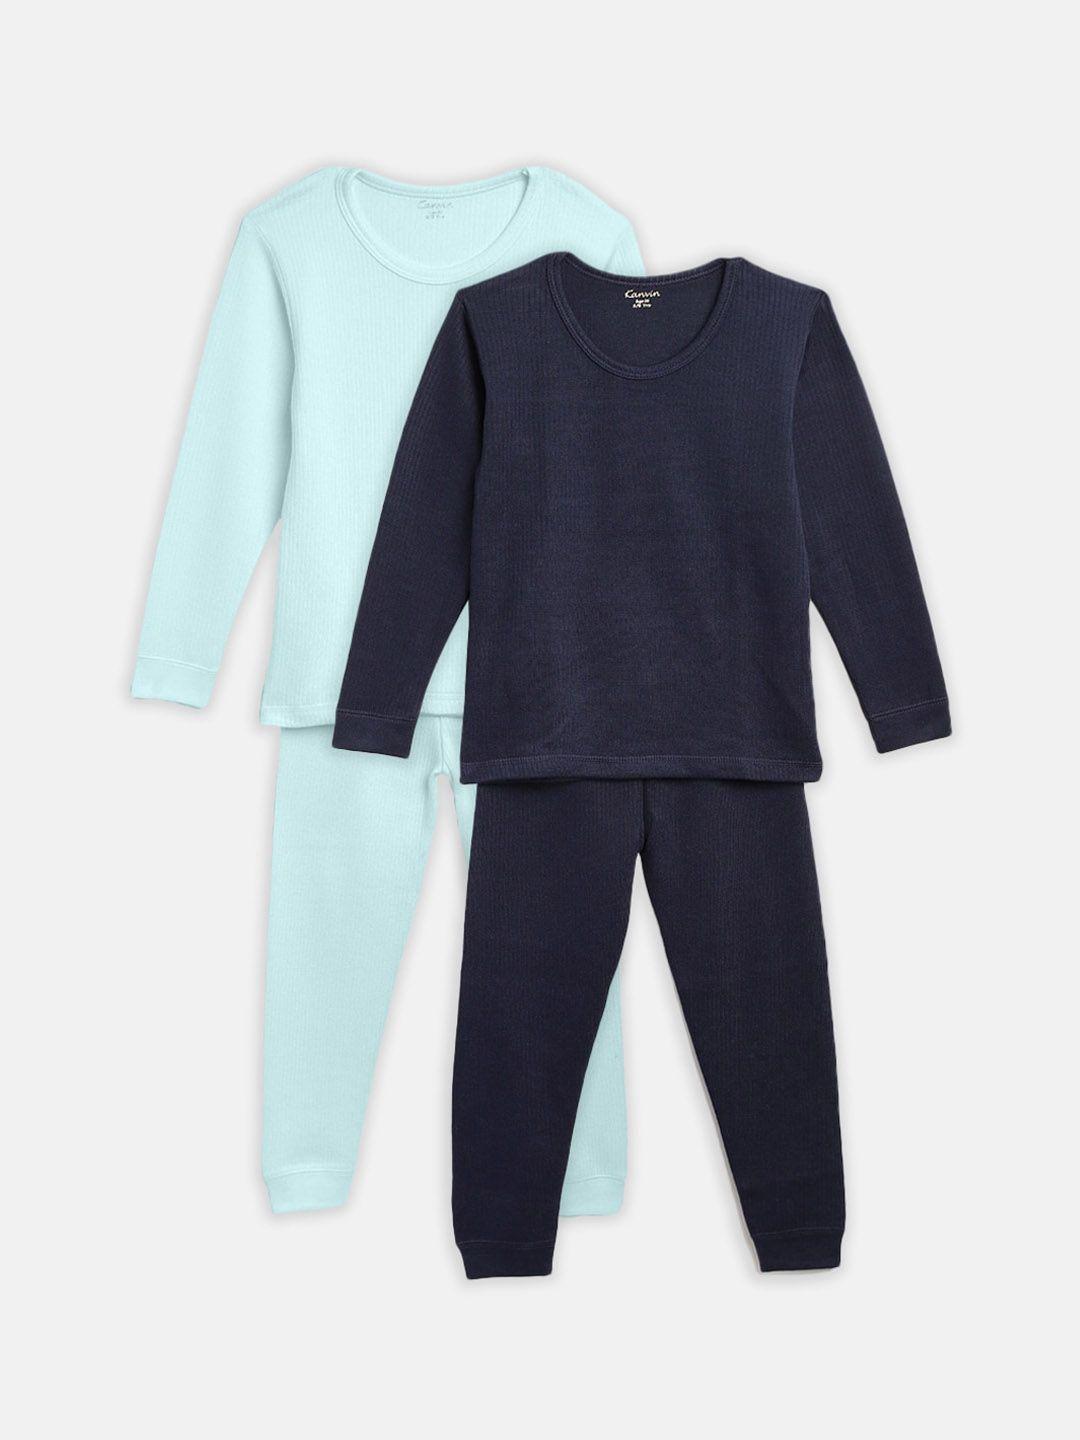 kanvin boys turquoise blue & navy blue set of 2 self striped thermal set